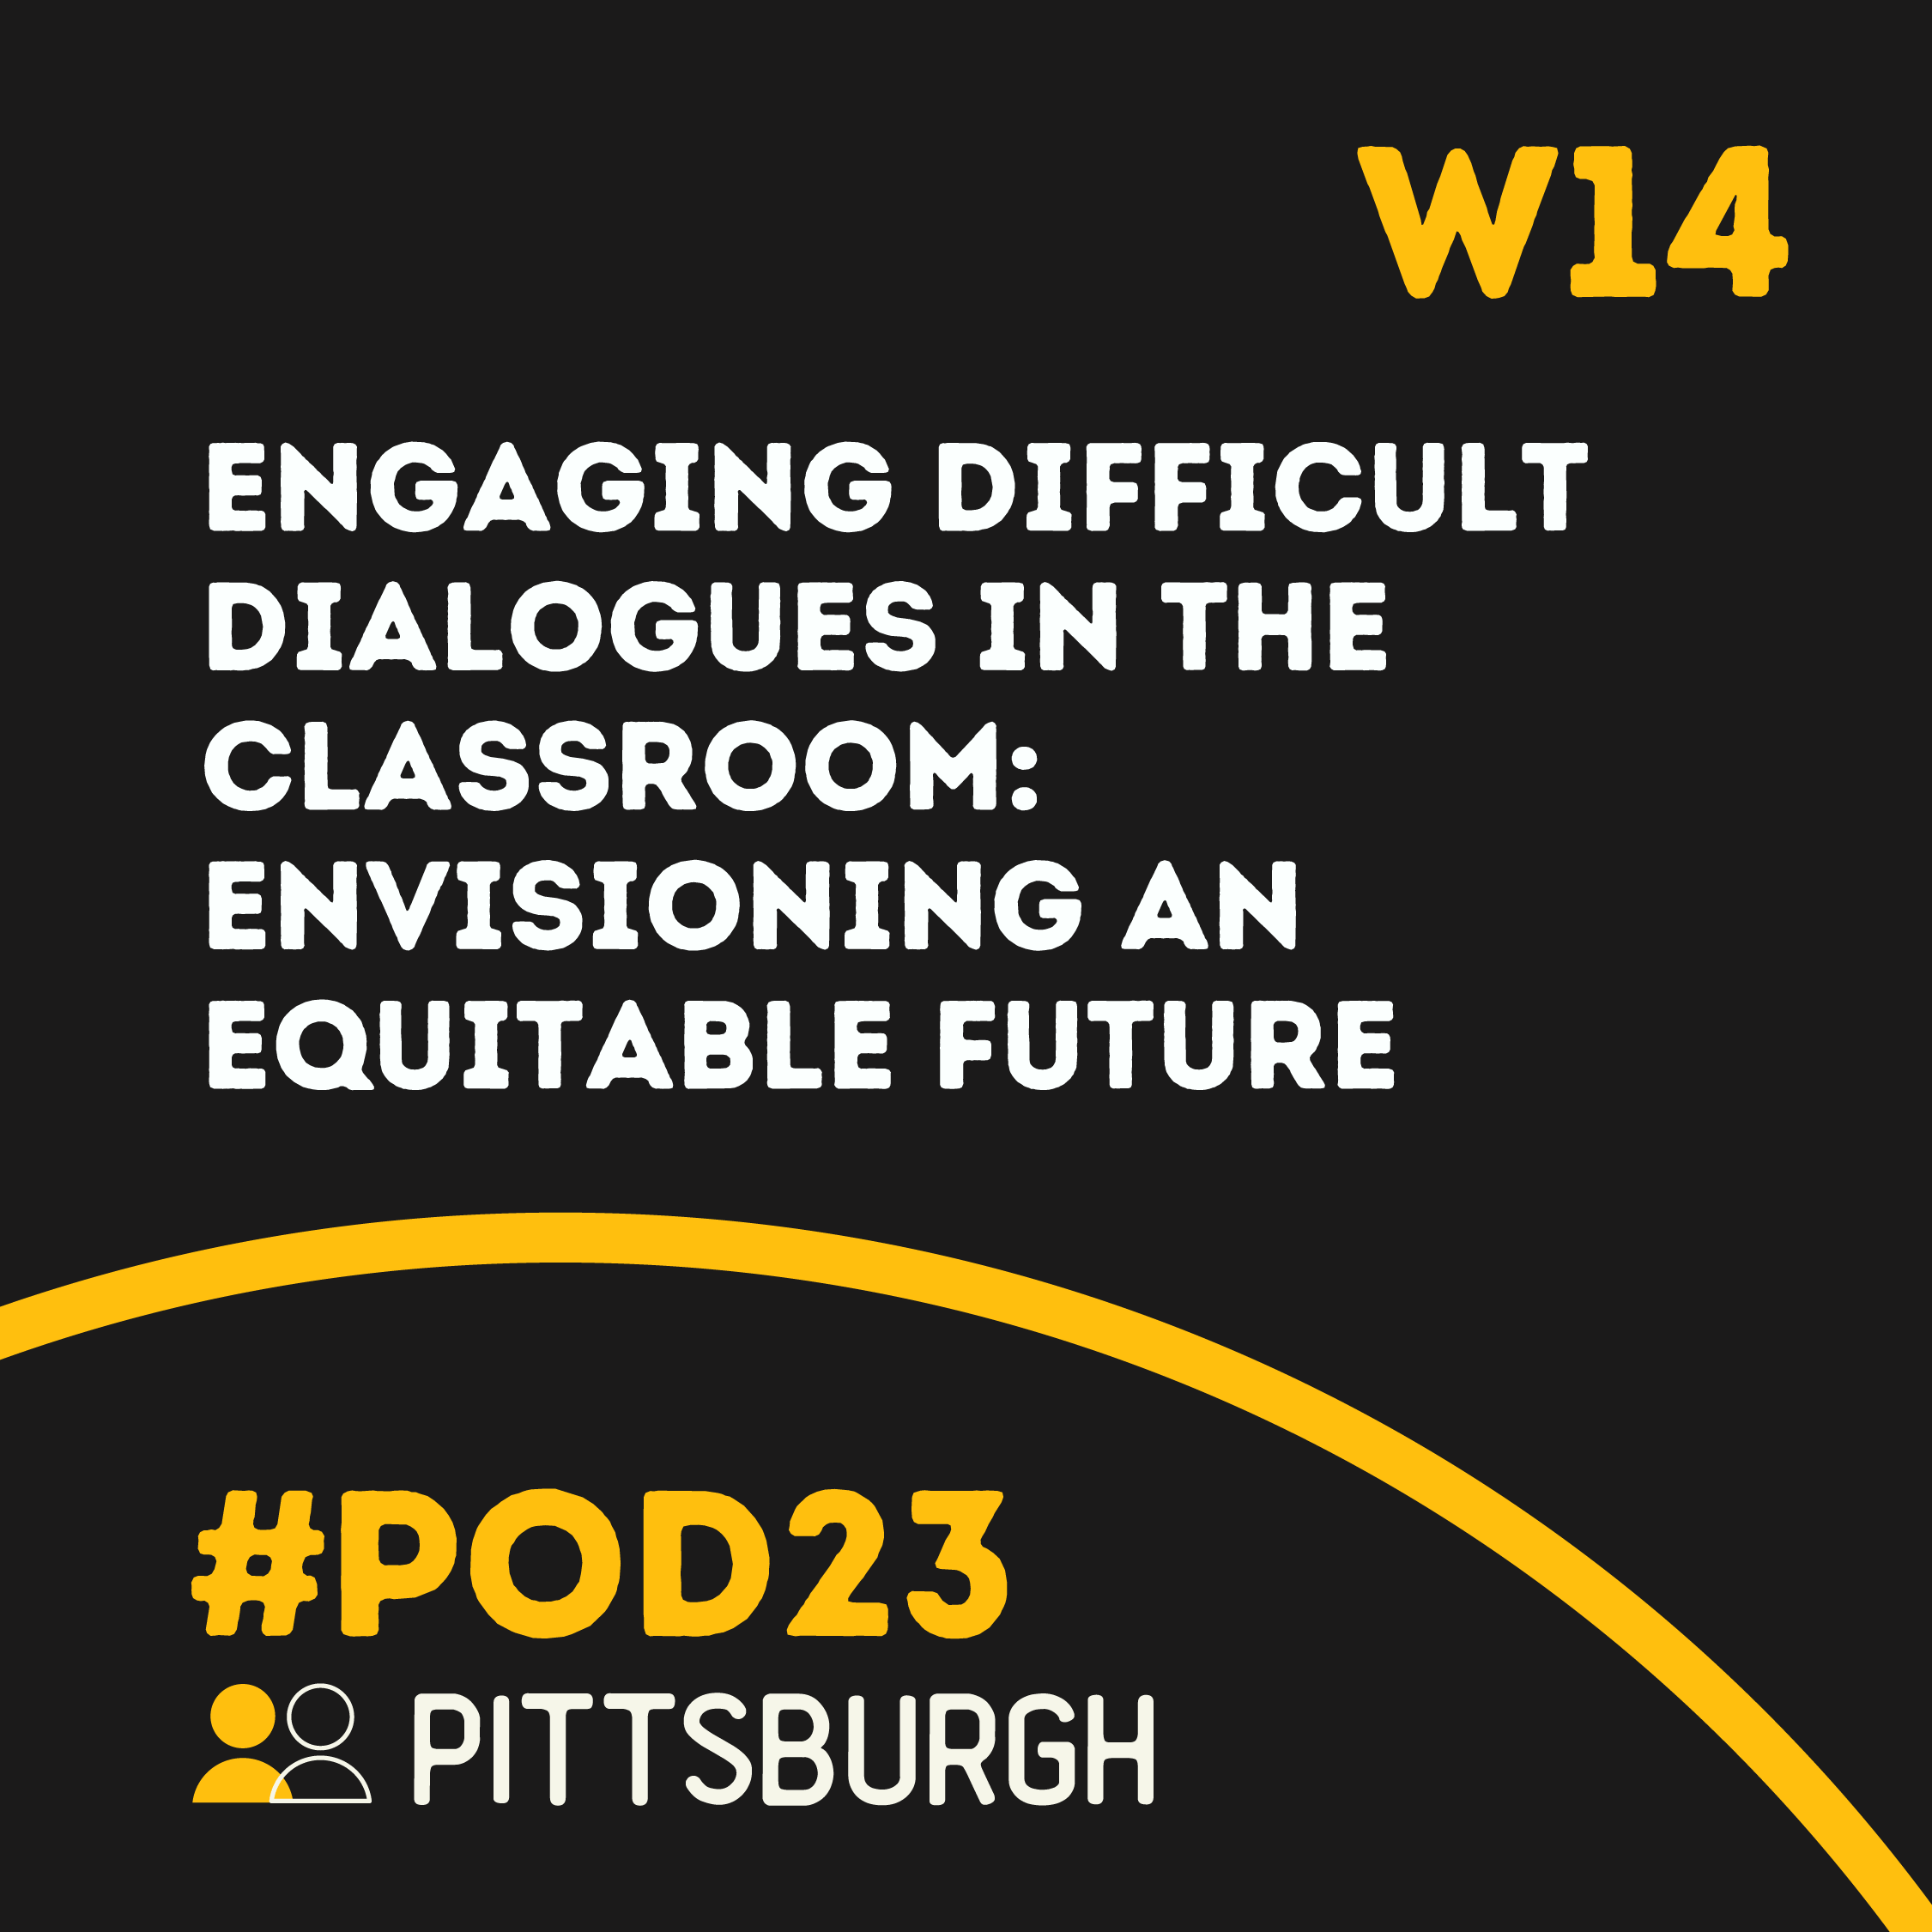 #POD23 W14: Engaging Difficult Dialogues in the Classroom: Envisioning an Equitable Future